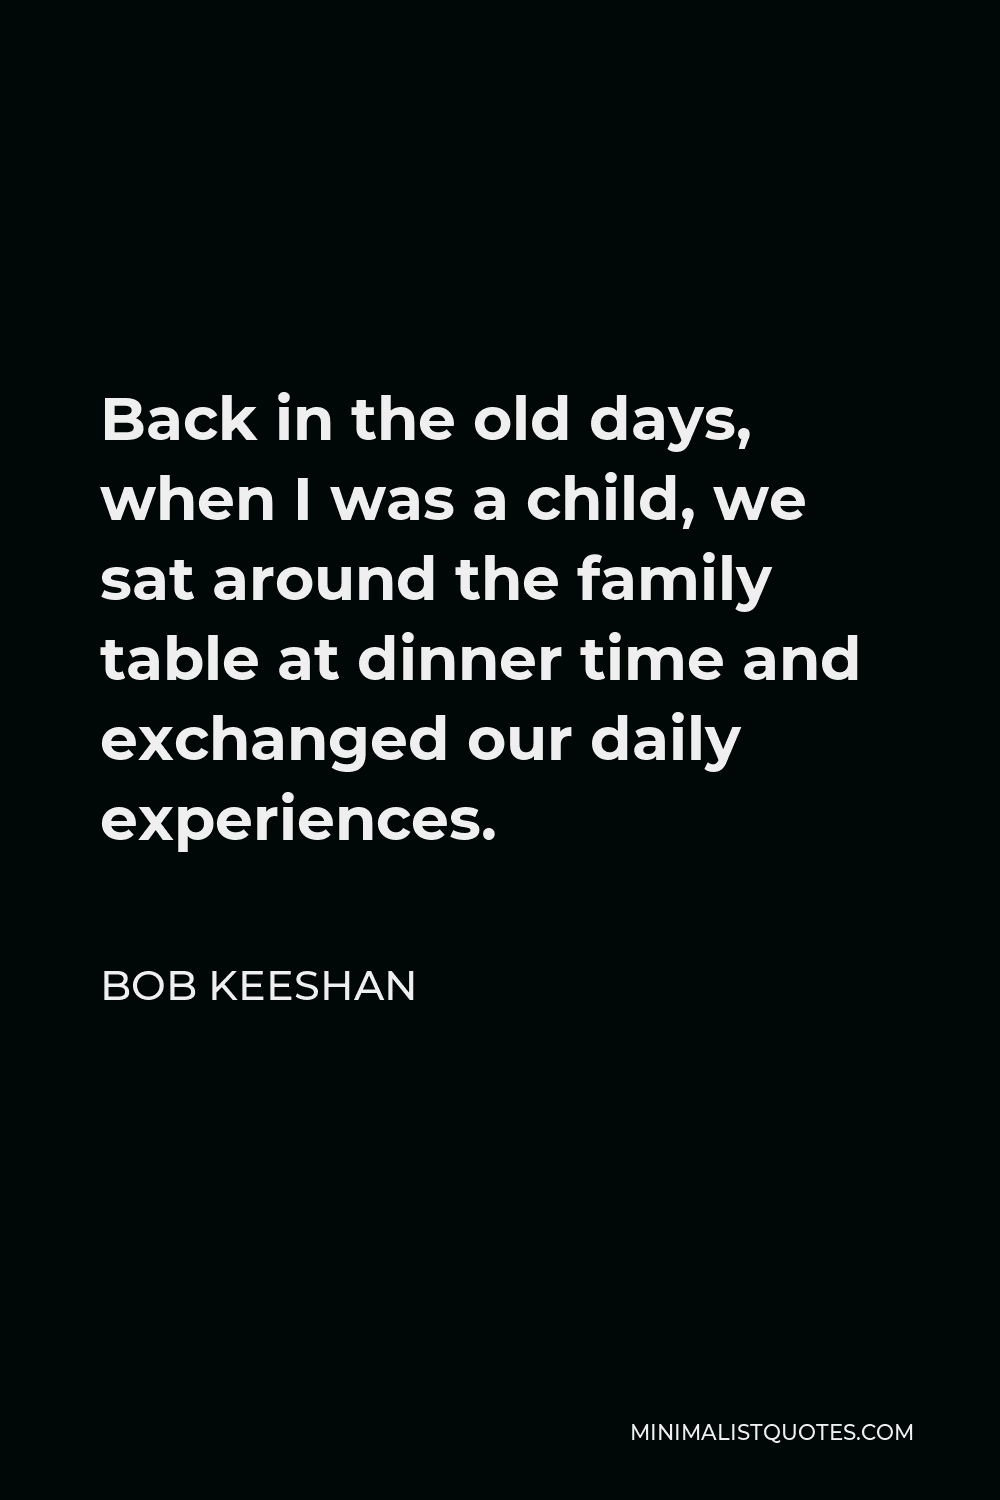 Bob Keeshan Quote - Back in the old days, when I was a child, we sat around the family table at dinner time and exchanged our daily experiences.